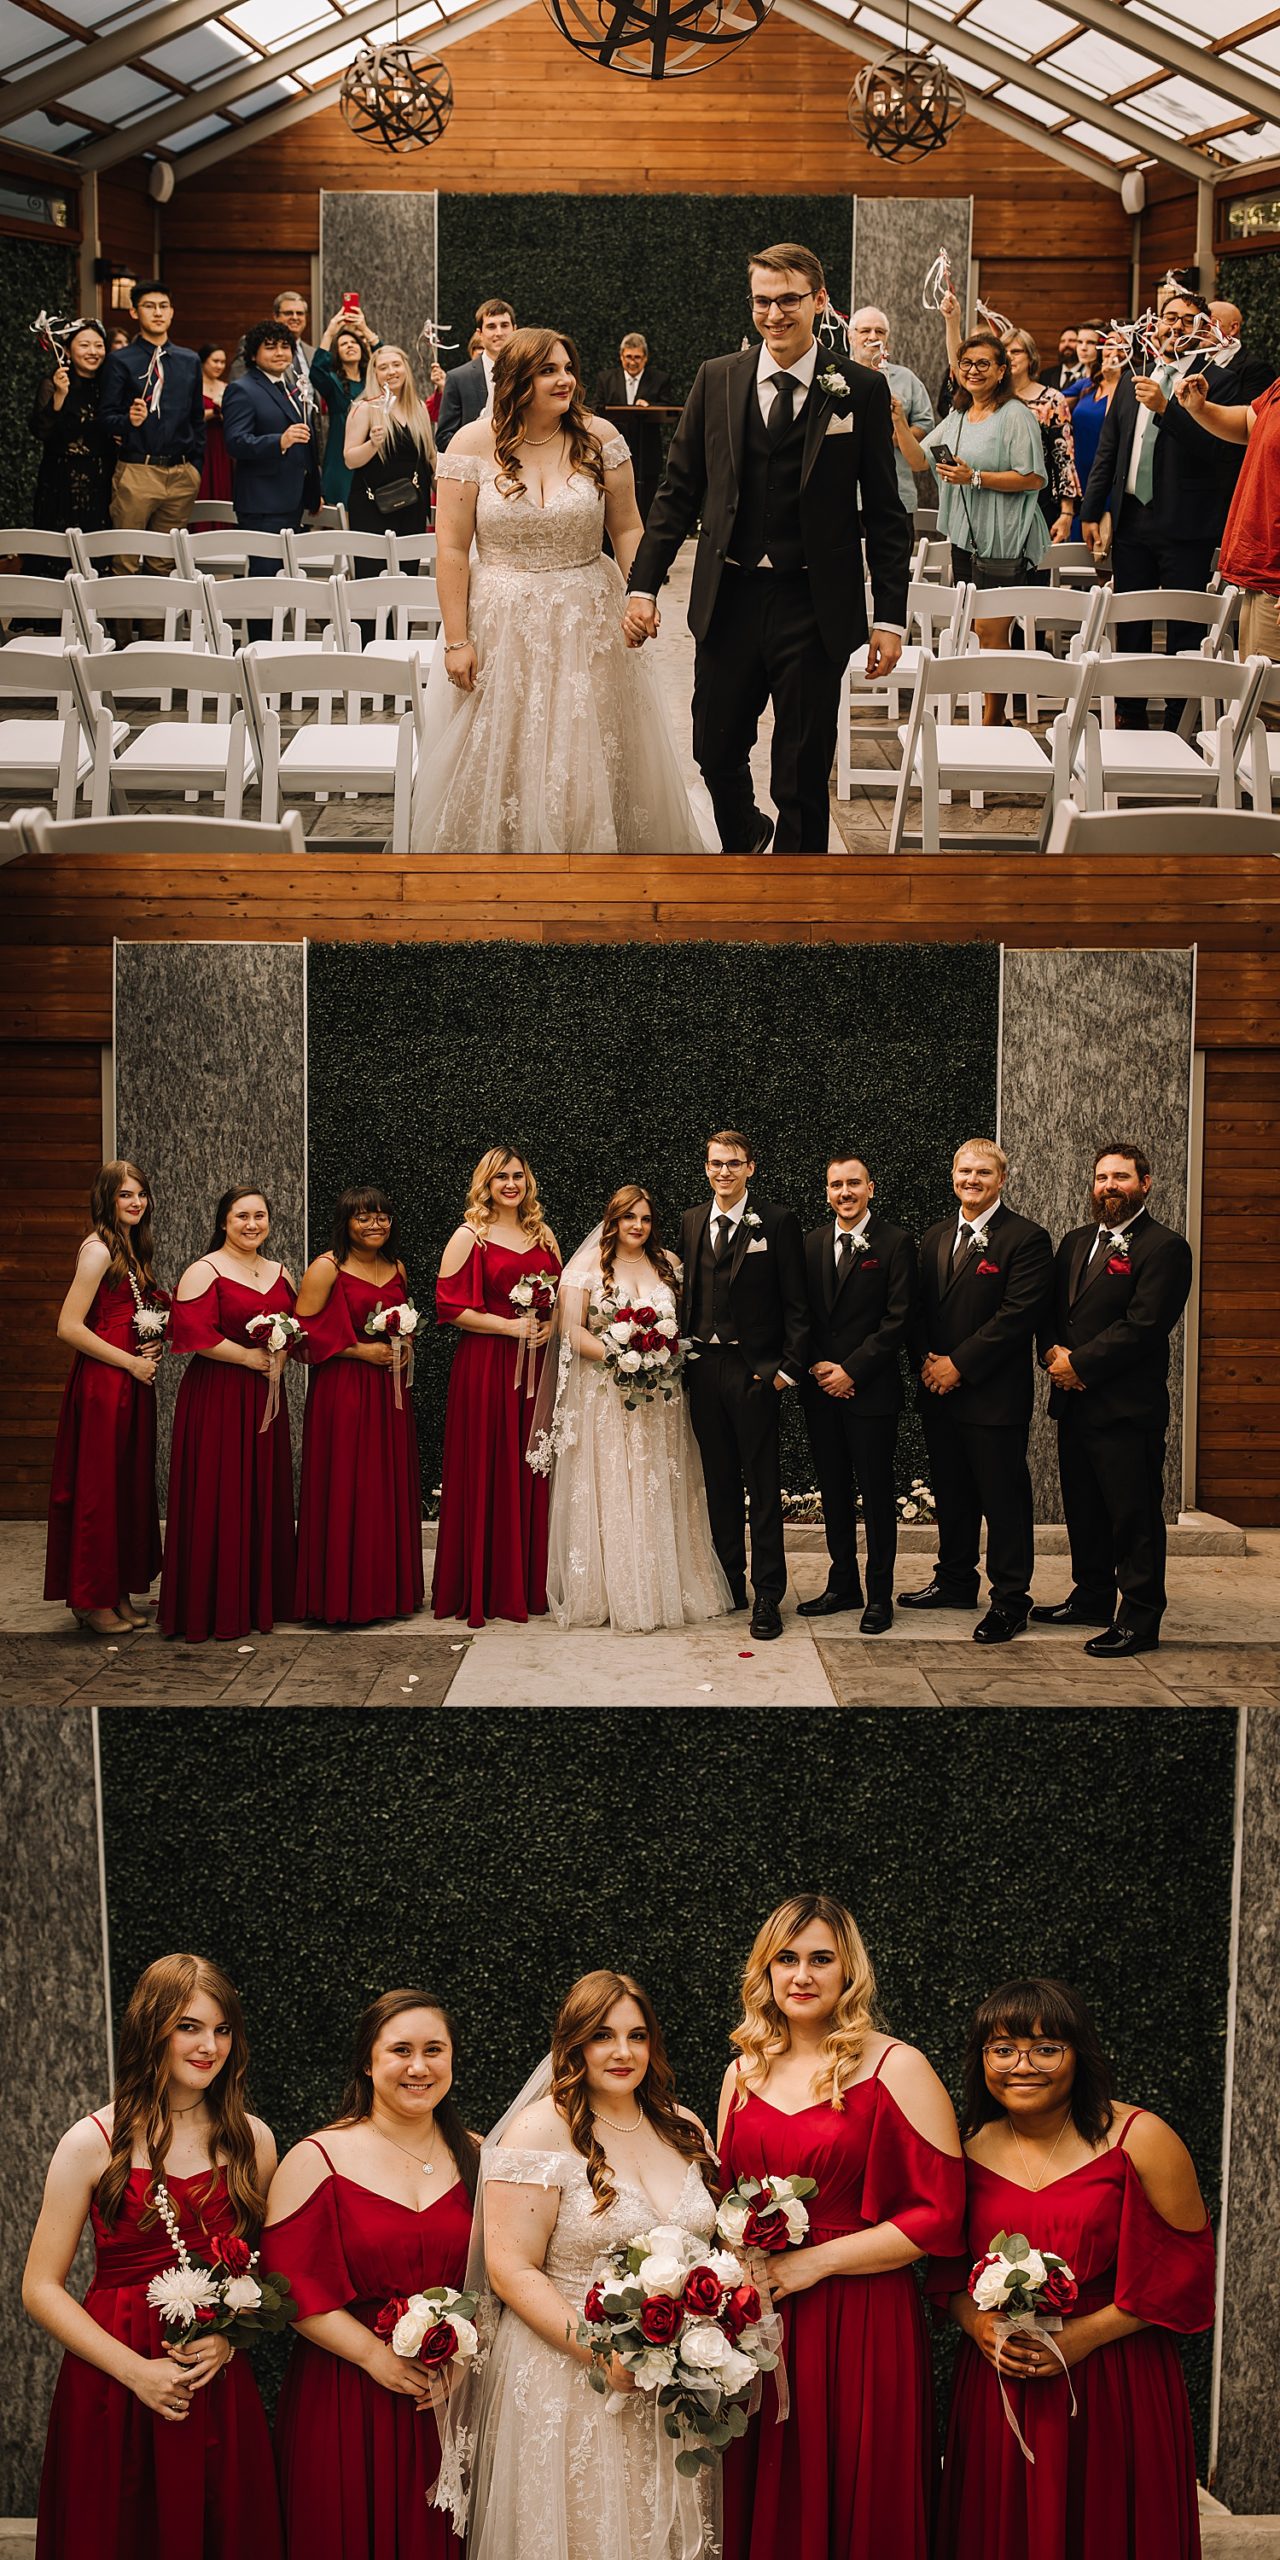 Bride and groom with wedding party wearing red accent colors